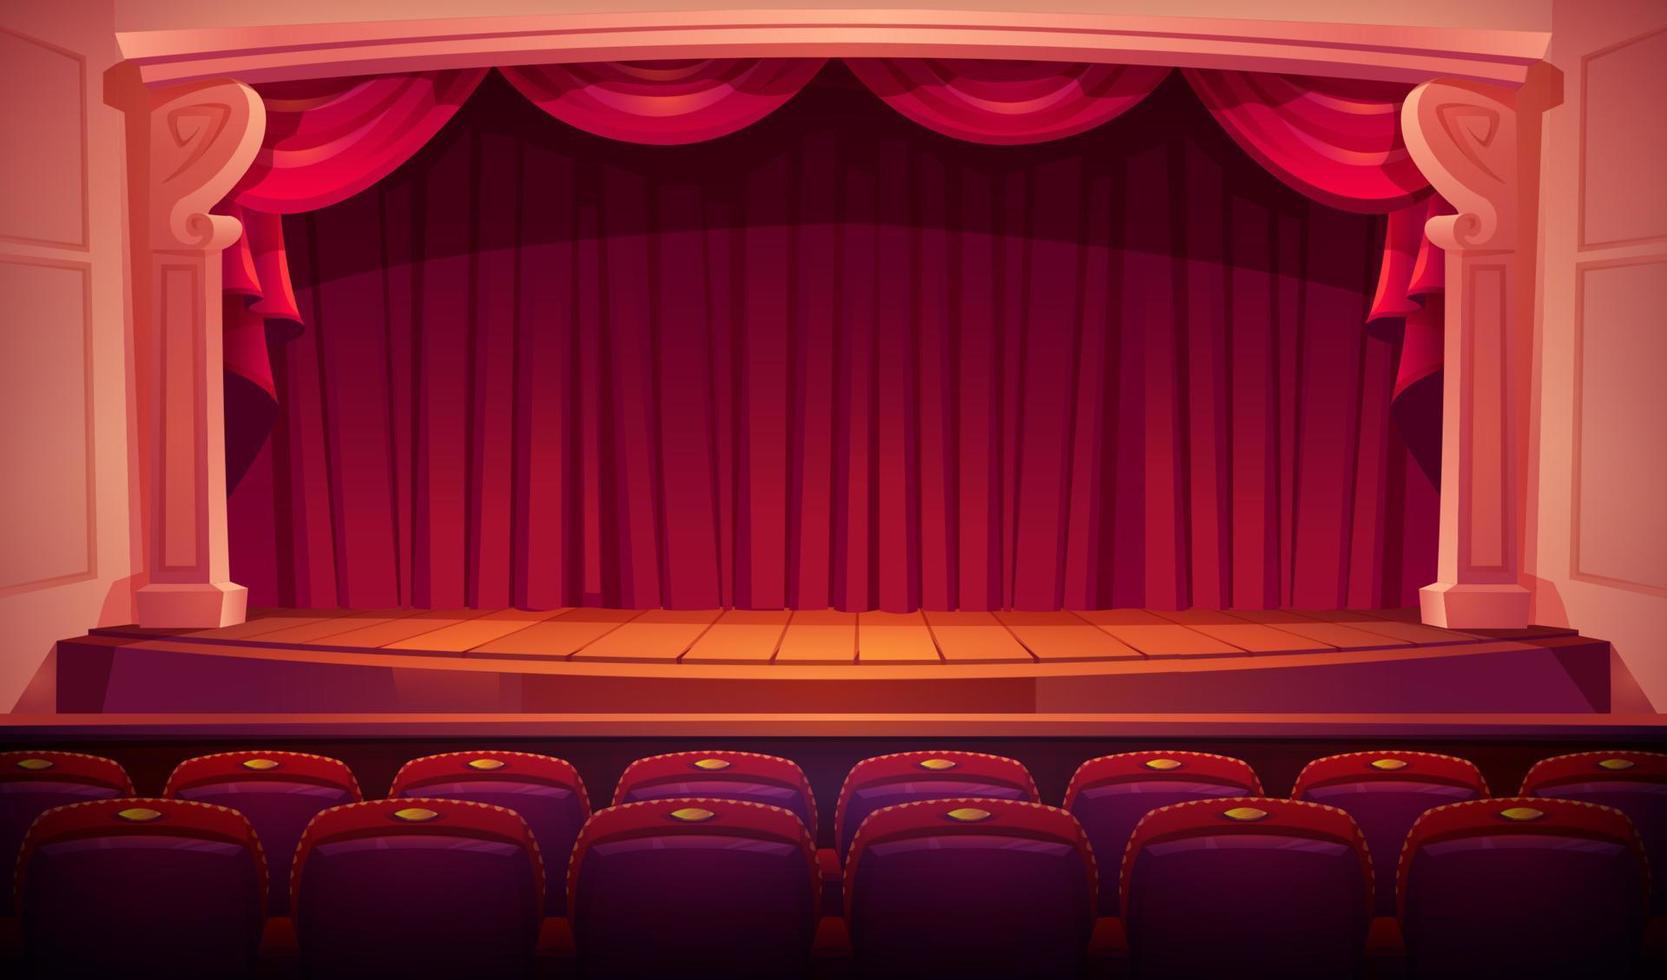 Theater stage with red curtains, theatre seats vector